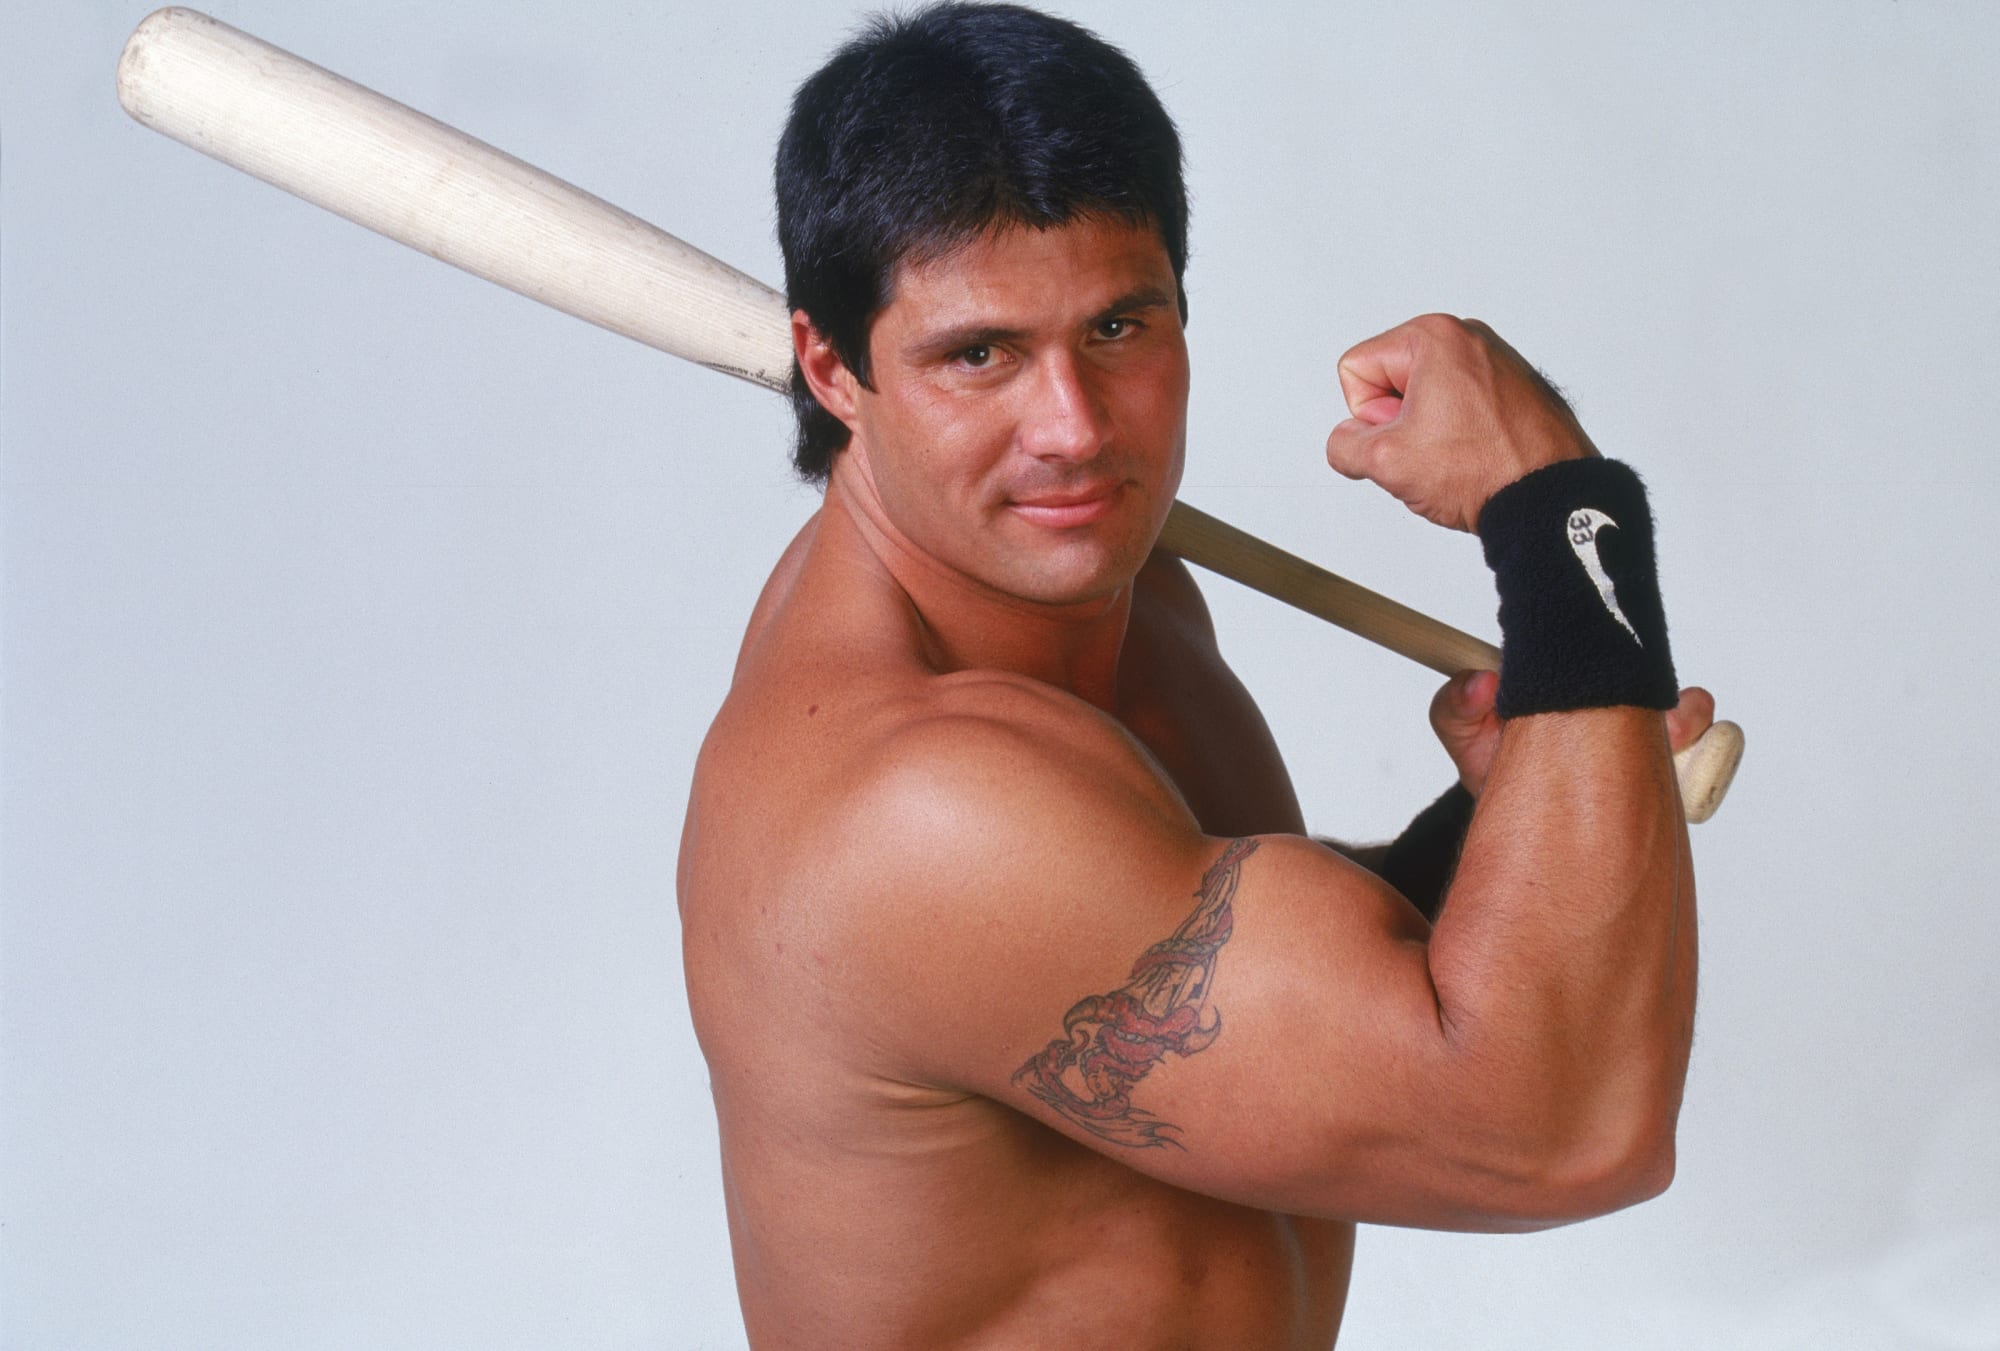 Tampa Bay Rays: Revisiting Jose Canseco’s Time in Tampa - Flipboard.